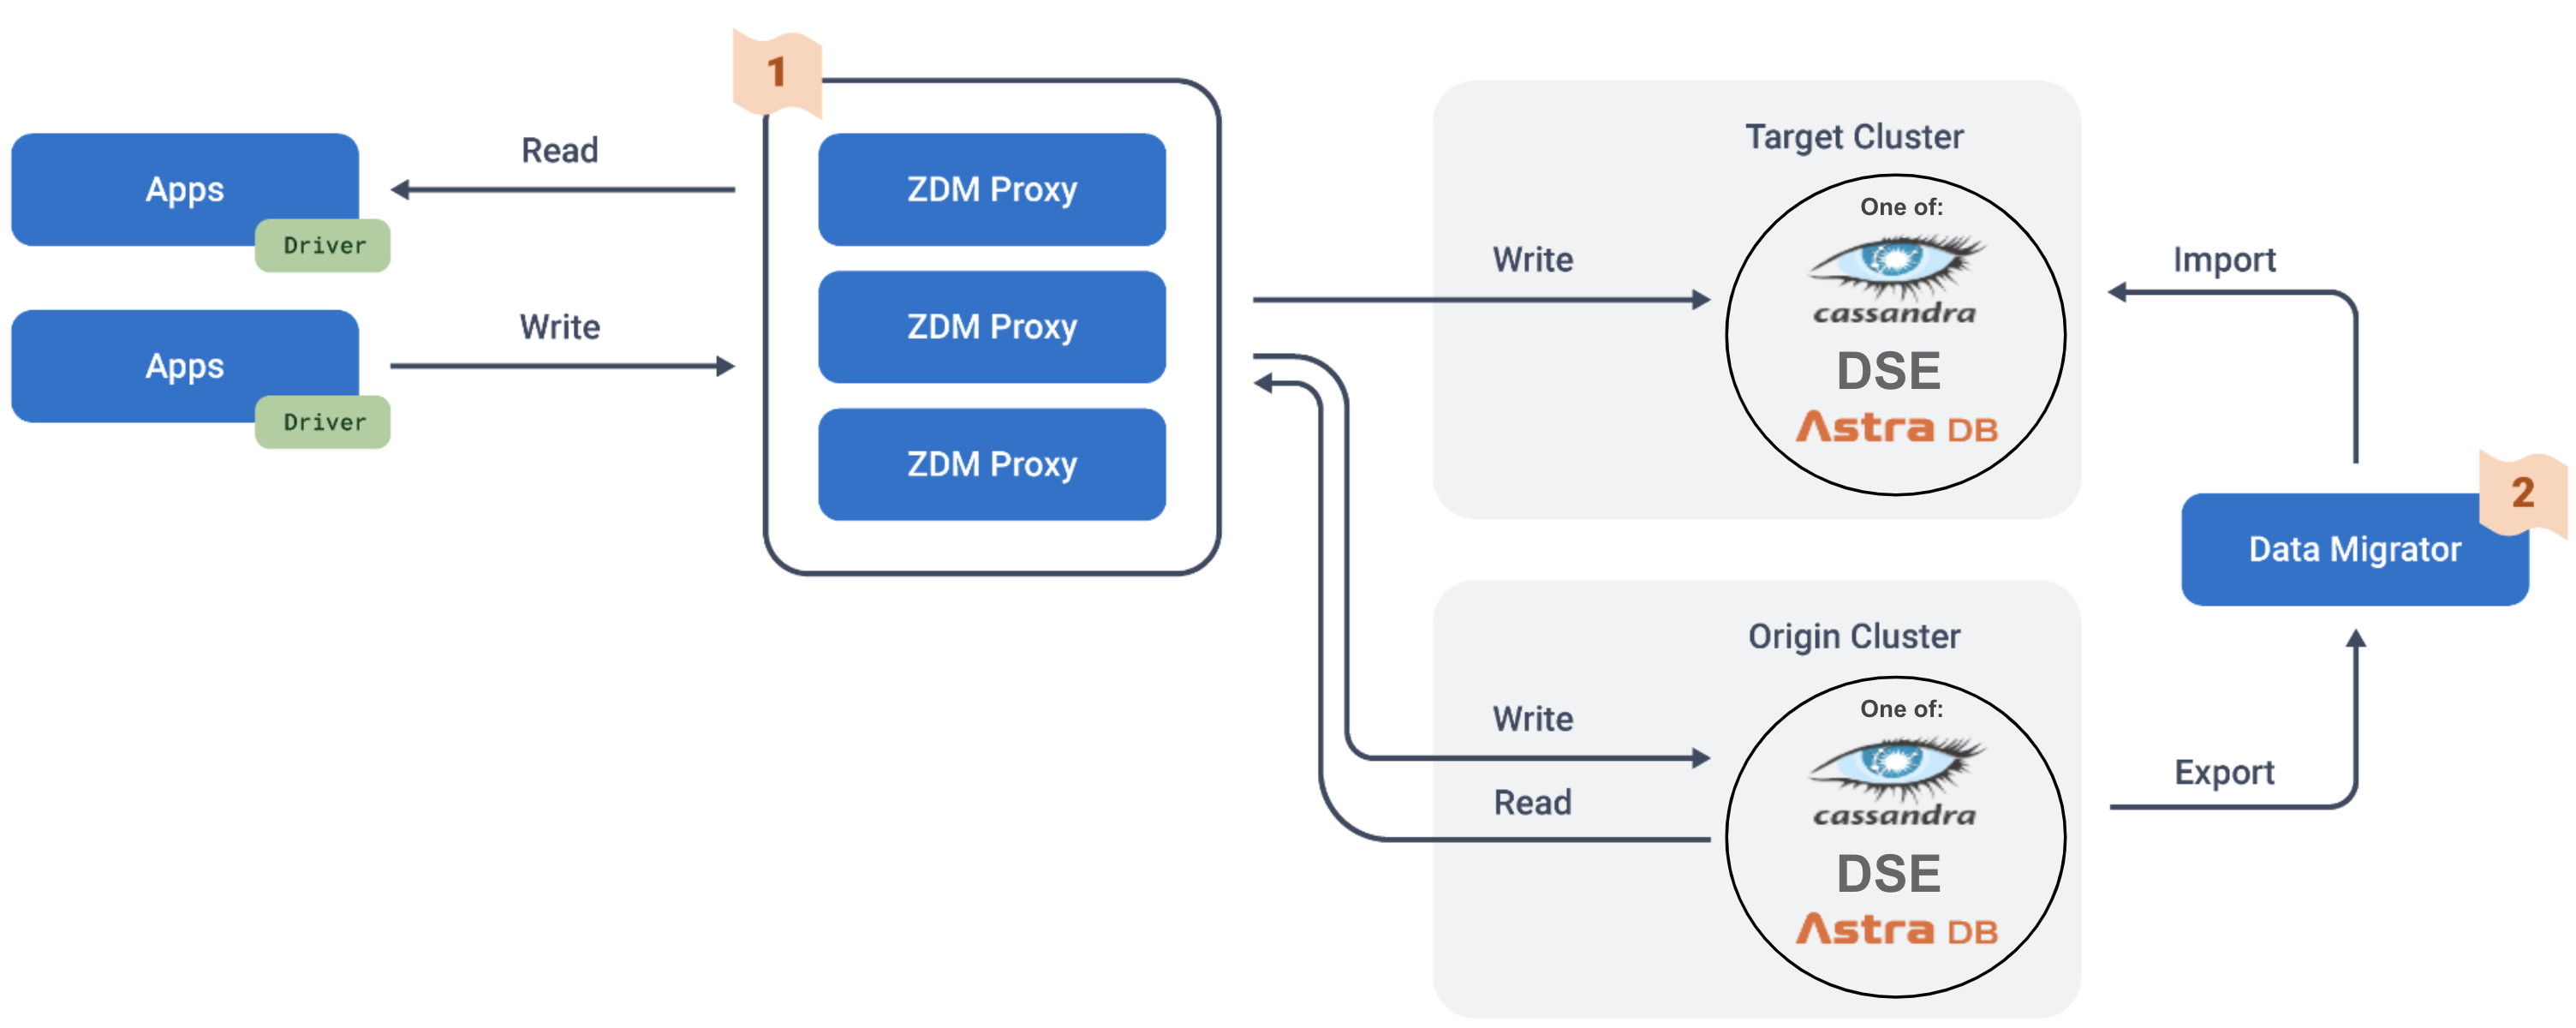 Migration workflow from client application to ZDM Proxy with dual writes to Origin and Target